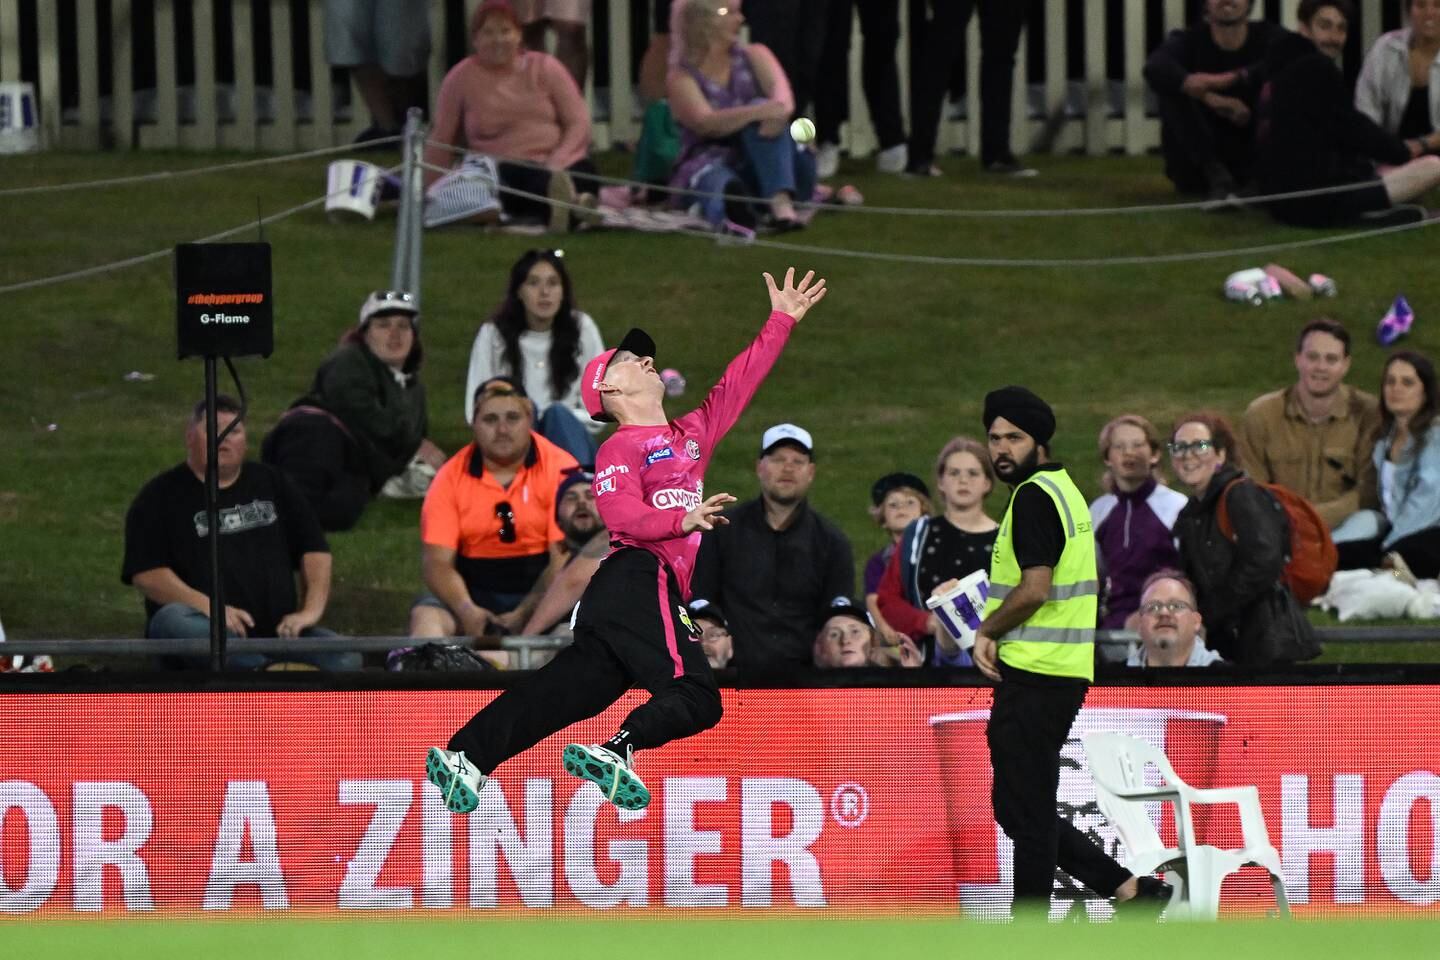 Jordan Silk of Sydney Sixers dives for a catch during their Big Bash League match against Hobart Hurricanes in Hobart last month. Getty Images